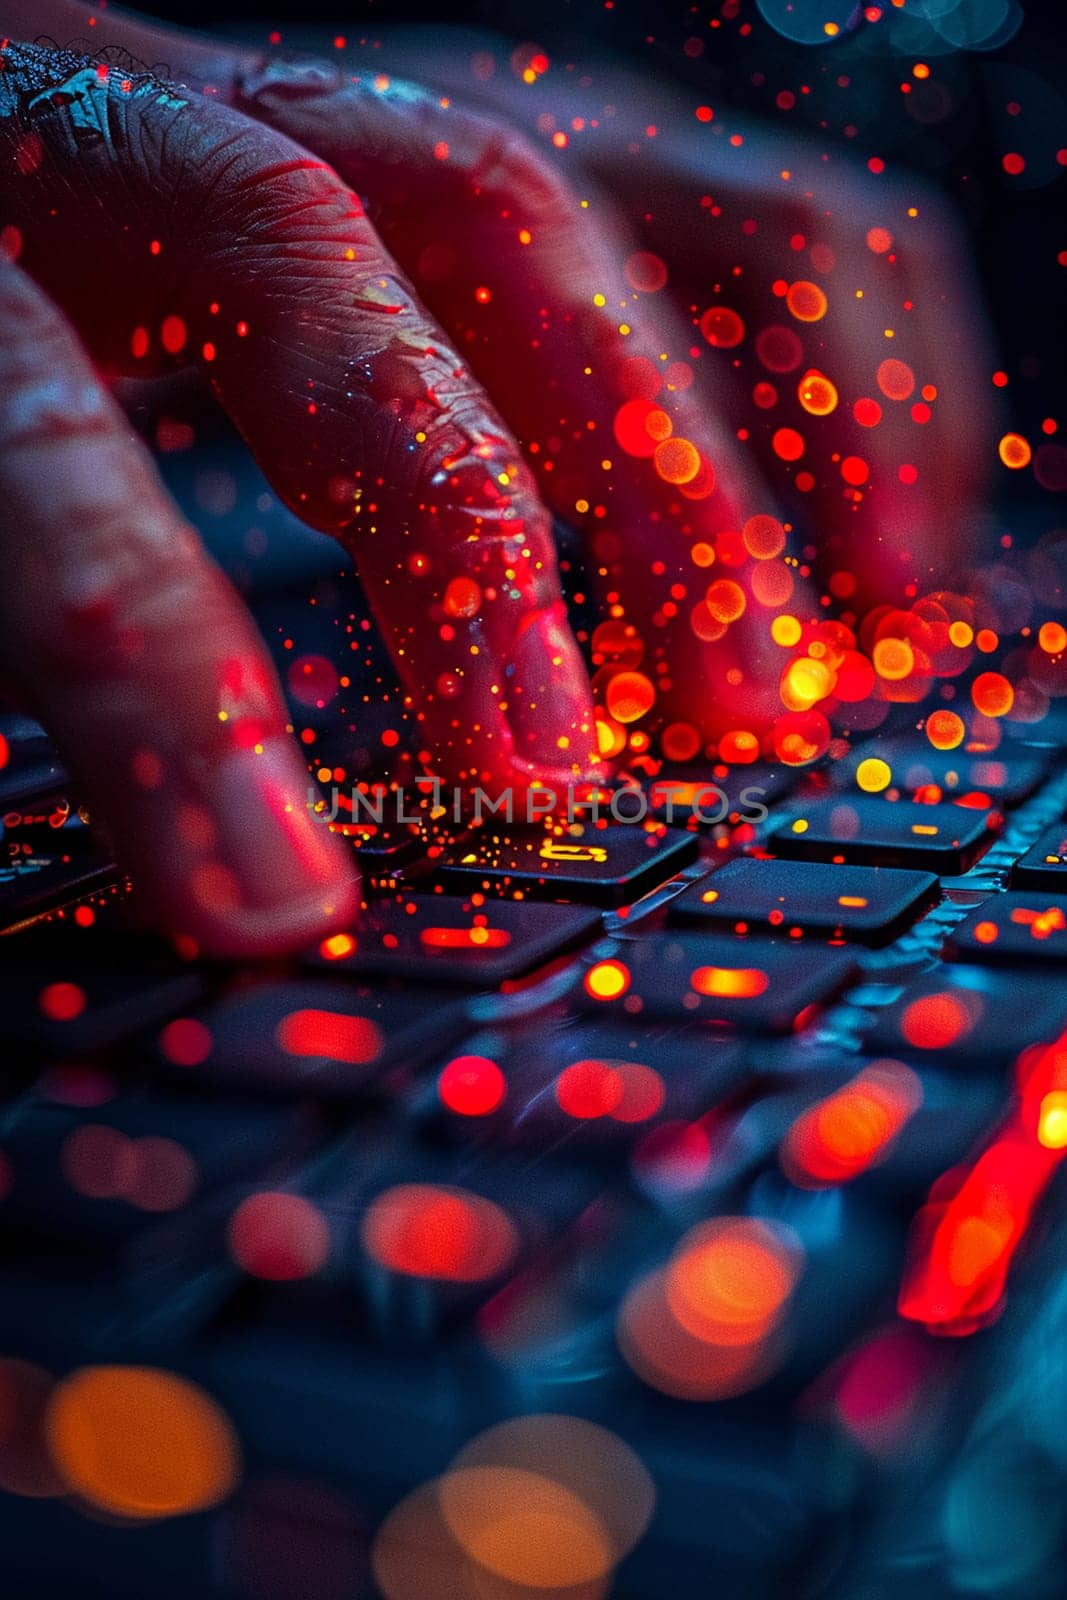 Macro shot of fingers on a laptop keyboard, depicting remote work and technology use.